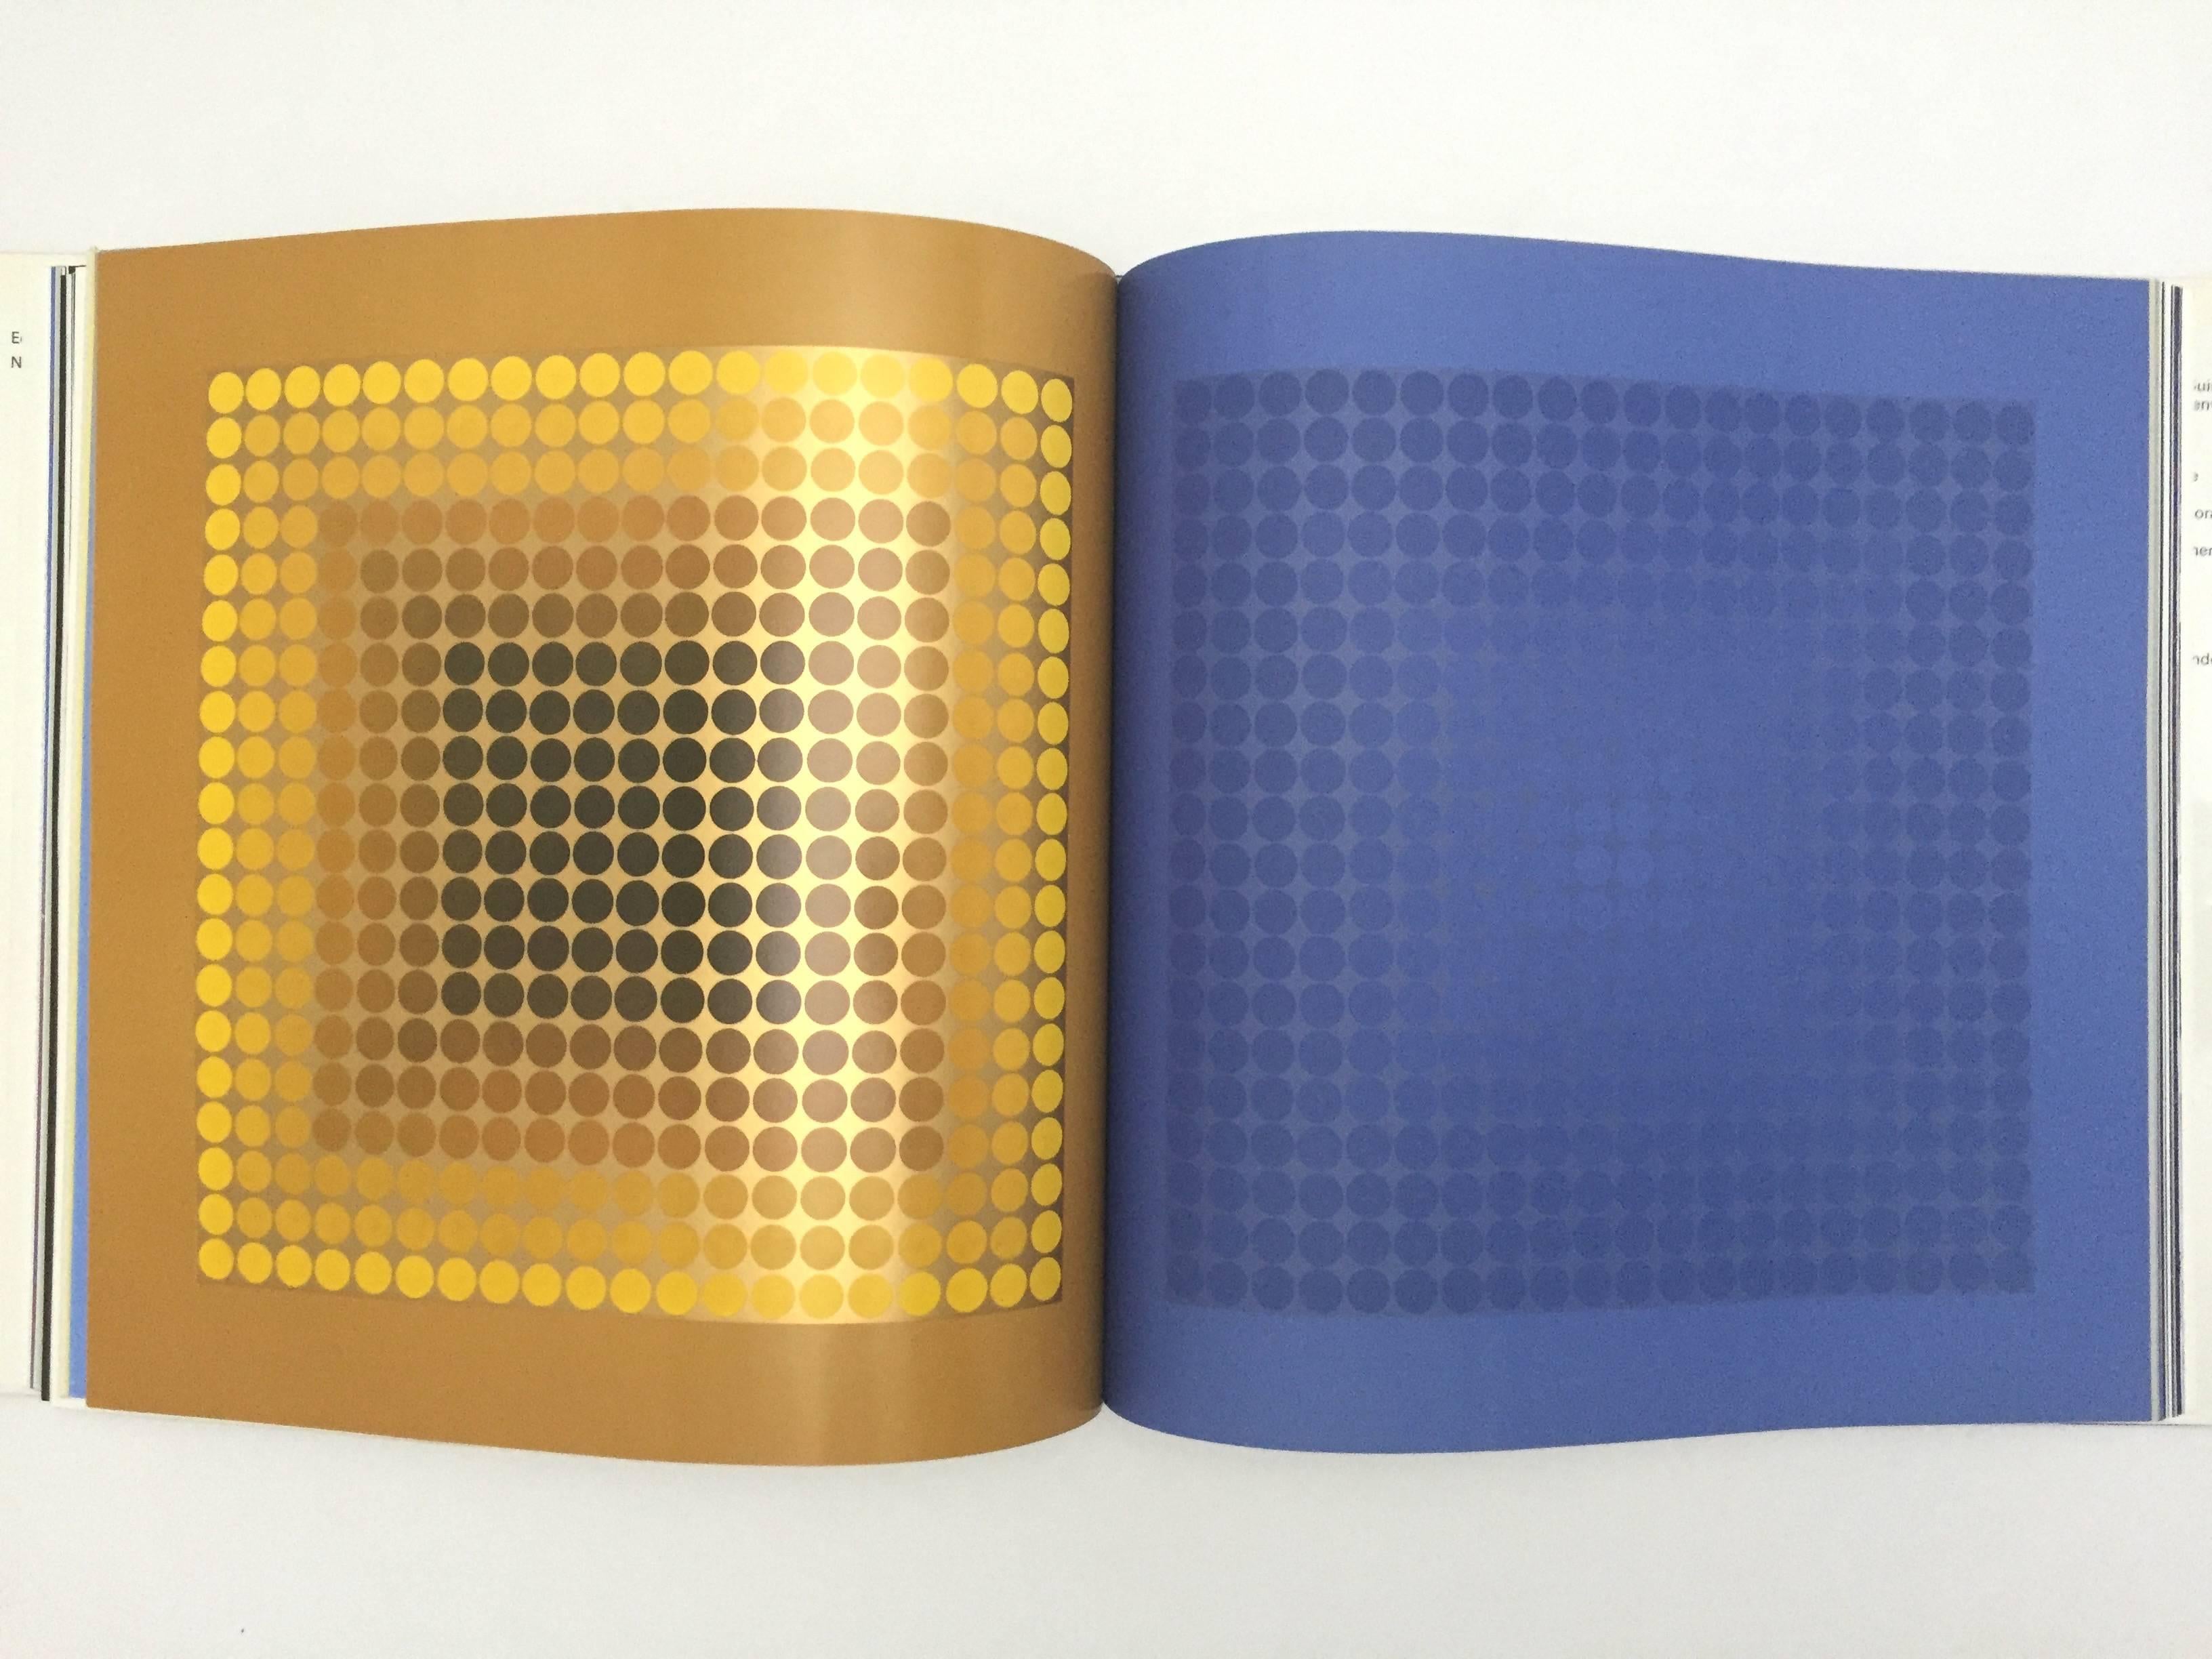 Vasarely Volumes I, II, III, IV Victor Vasarely, 1st Editions 1973-1979 1